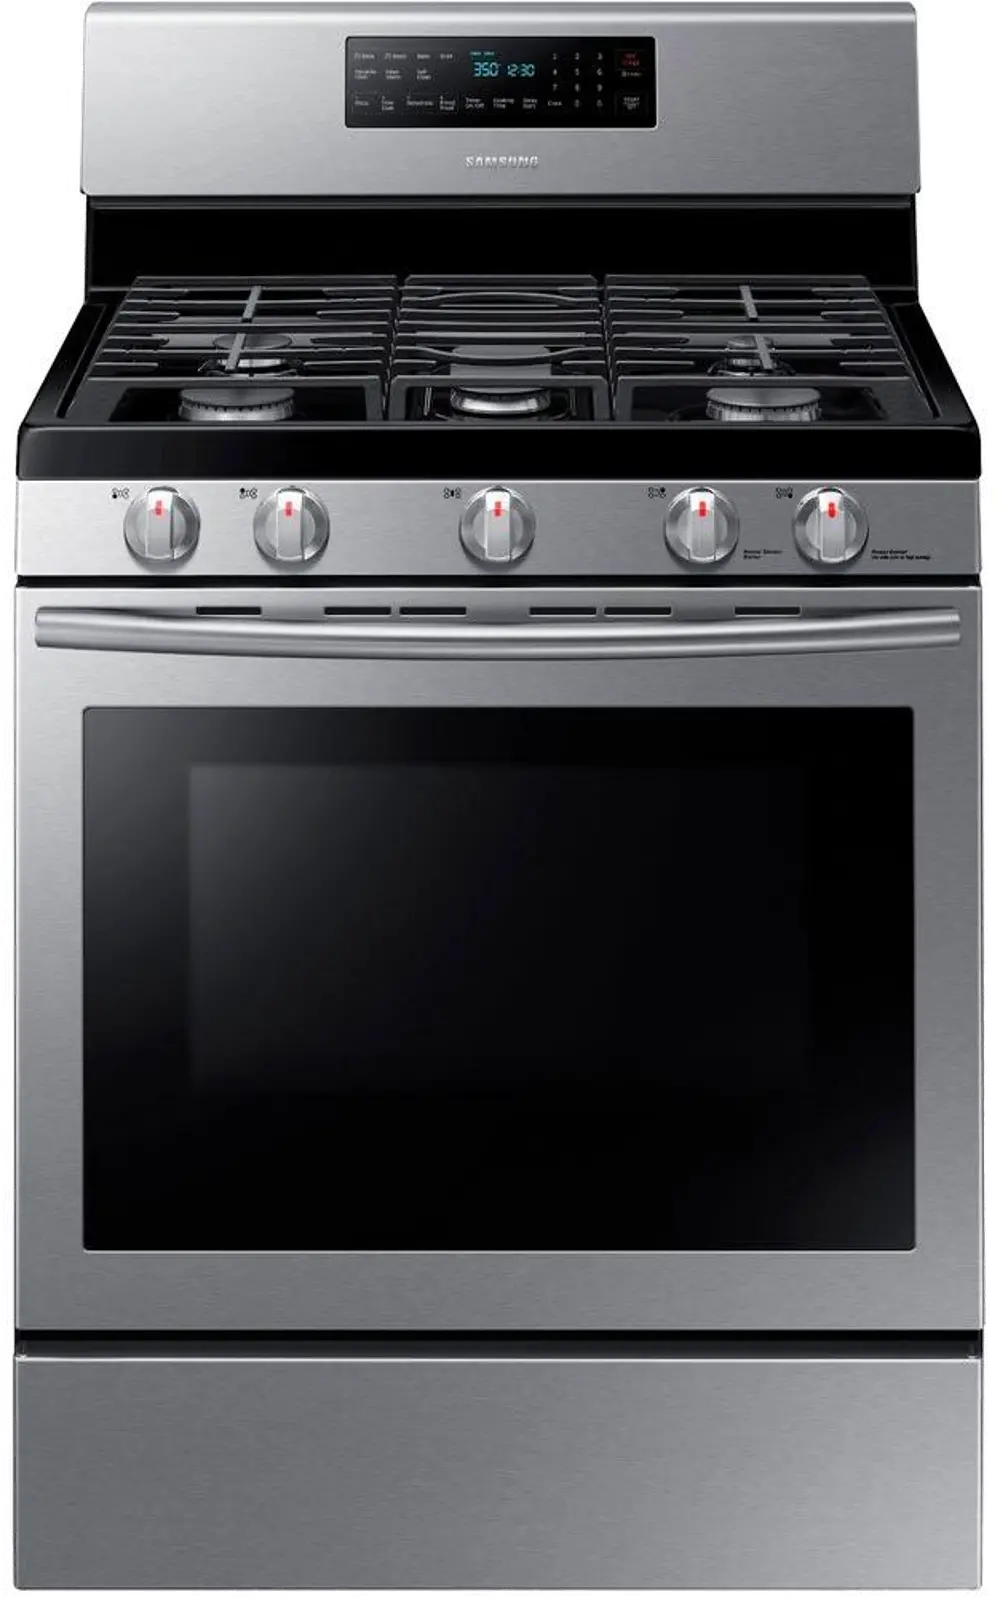 NX58H5600SS Samsung Gas Range with 5th Oval Burner - 5.8 cu. ft. Stainless Steel-1